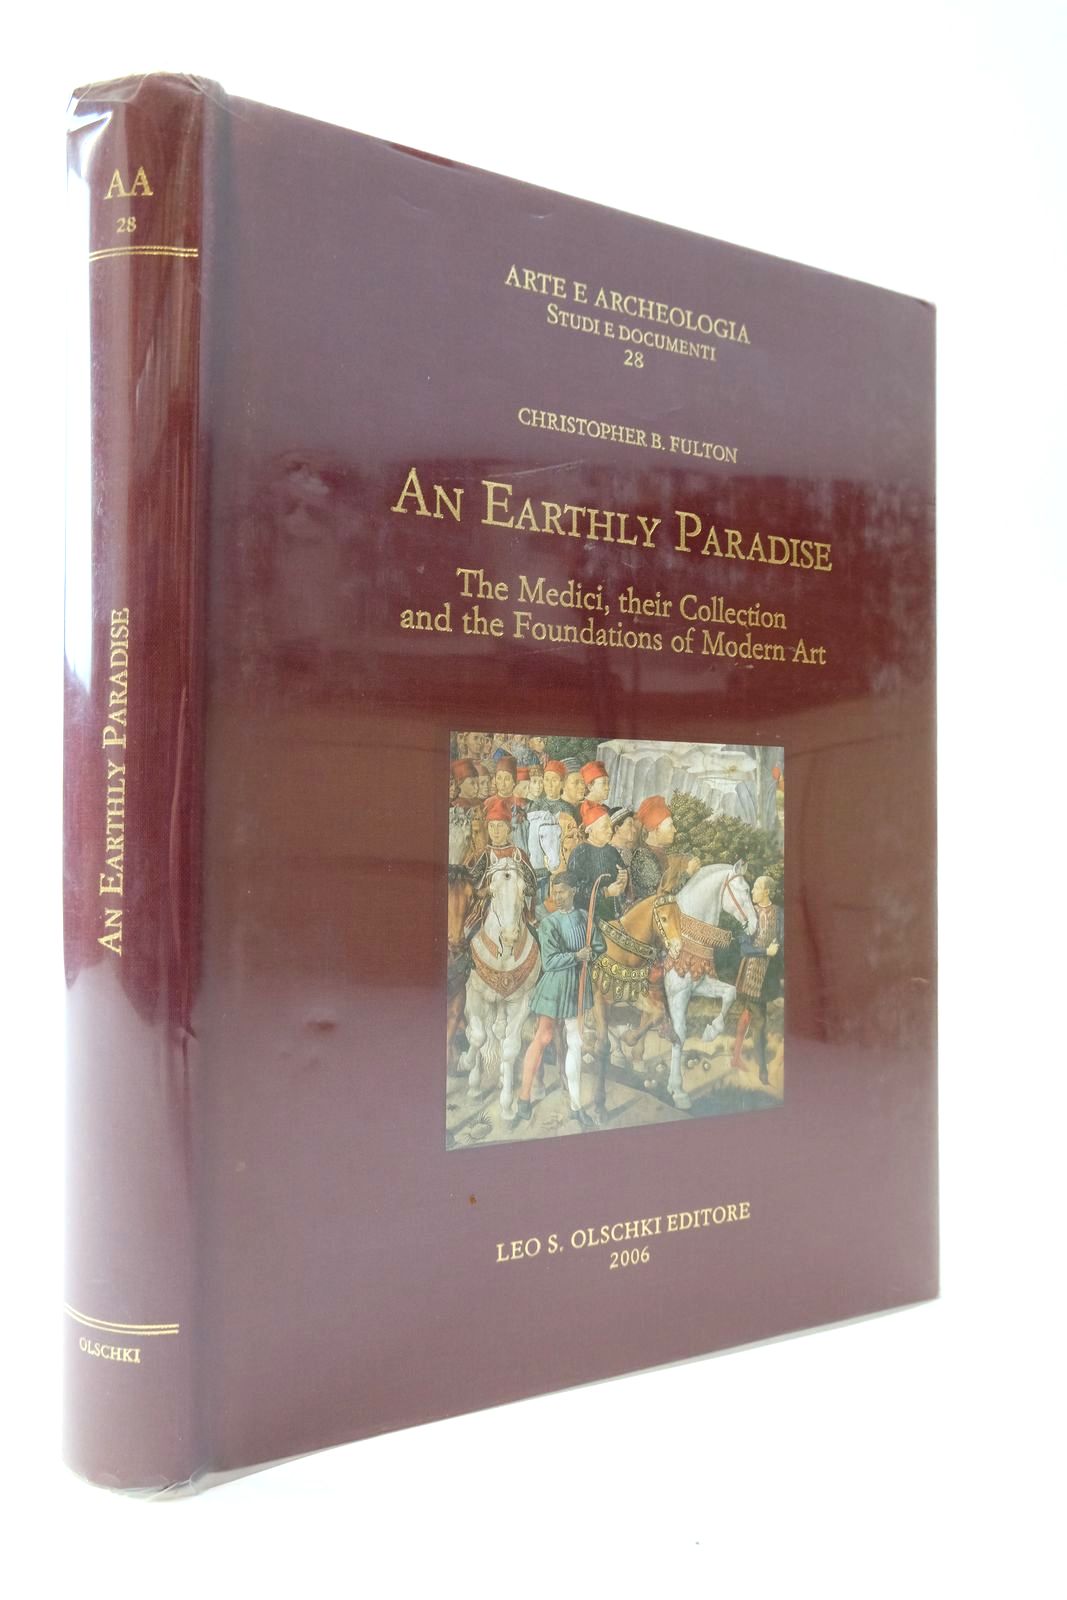 Photo of AN EARTHLY PARADISE: THE MEDICI, THEIR COLLECTION AND THE FOUNDATIONS OF MODERN ART written by Fulton, Christopher B. published by Leo S. Olschki Editore (STOCK CODE: 2139151)  for sale by Stella & Rose's Books